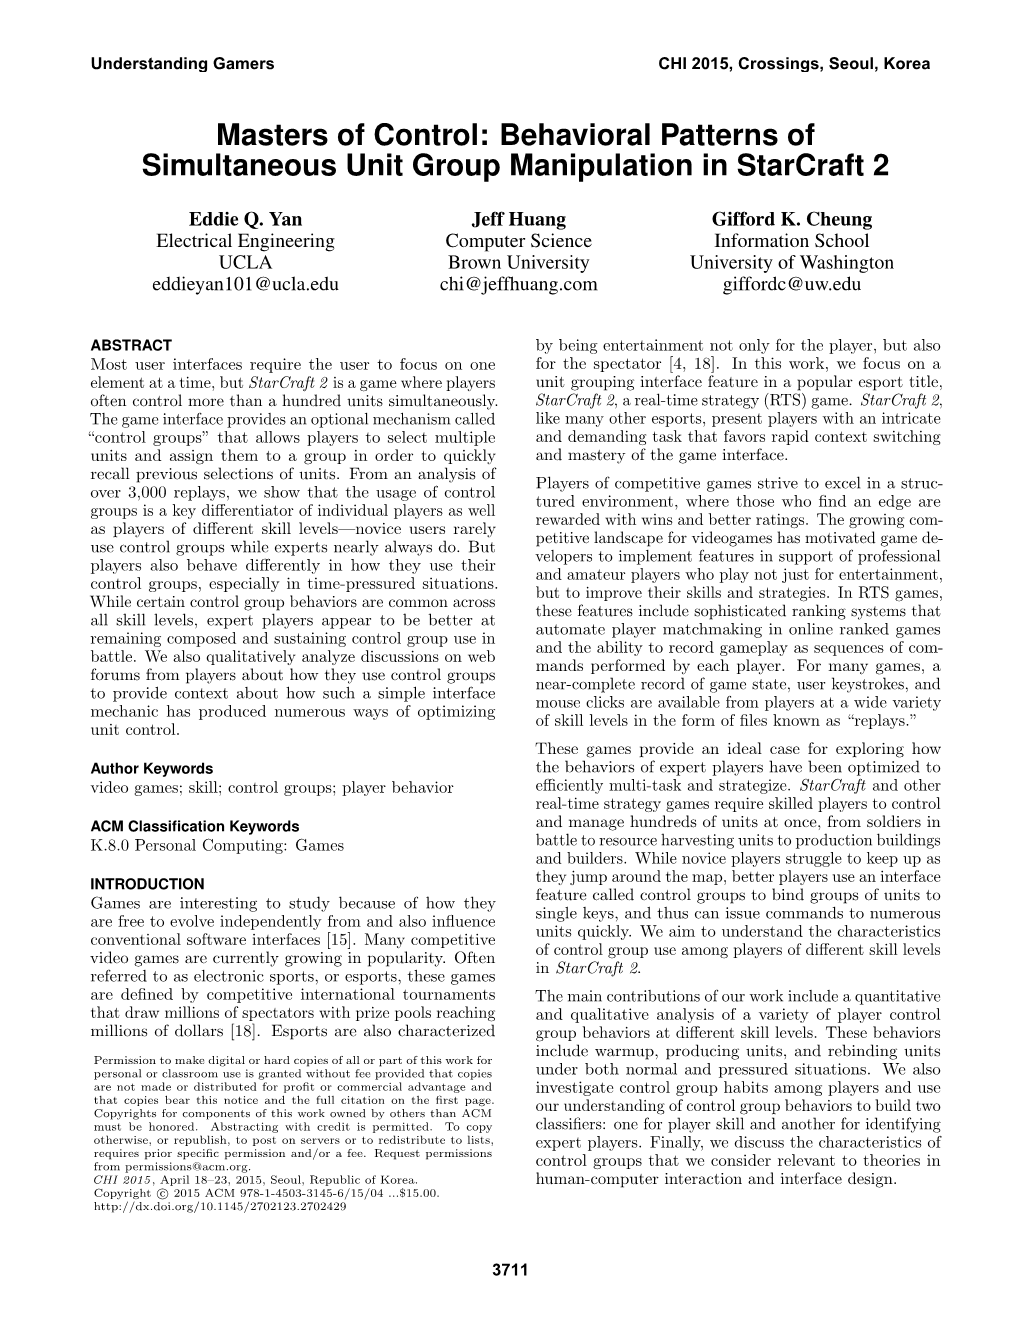 Masters of Control: Behavioral Patterns of Simultaneous Unit Group Manipulation in Starcraft 2